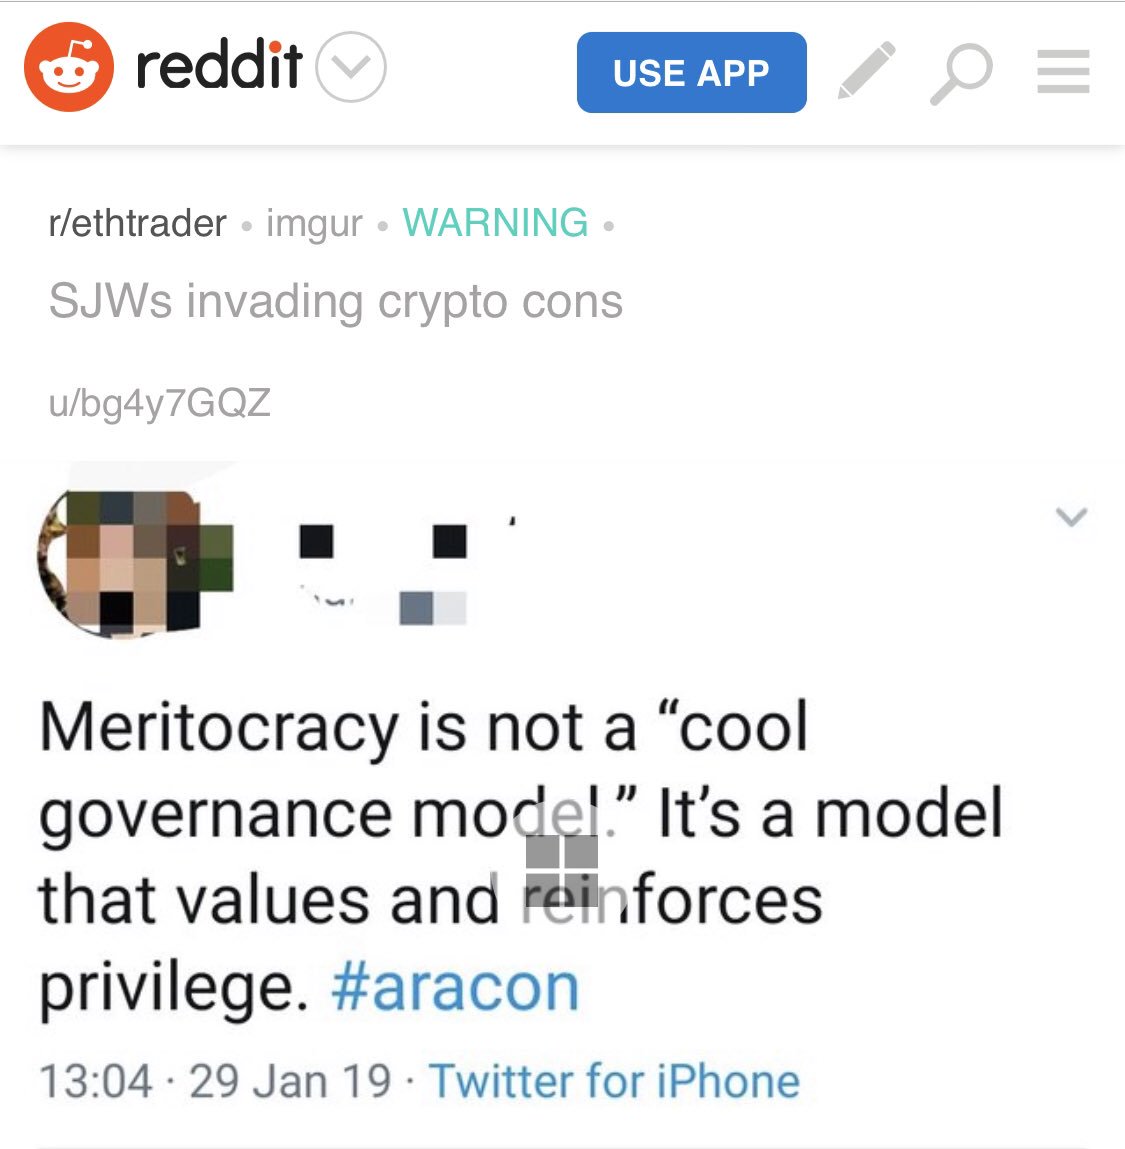 Redditer posting a screenshot of my tweet ‘Meritocracy is not a “cool governance model.” It’s a model that values and reinforces privilege. #aracon.” with the comment “SJWs invading crypto cons.”